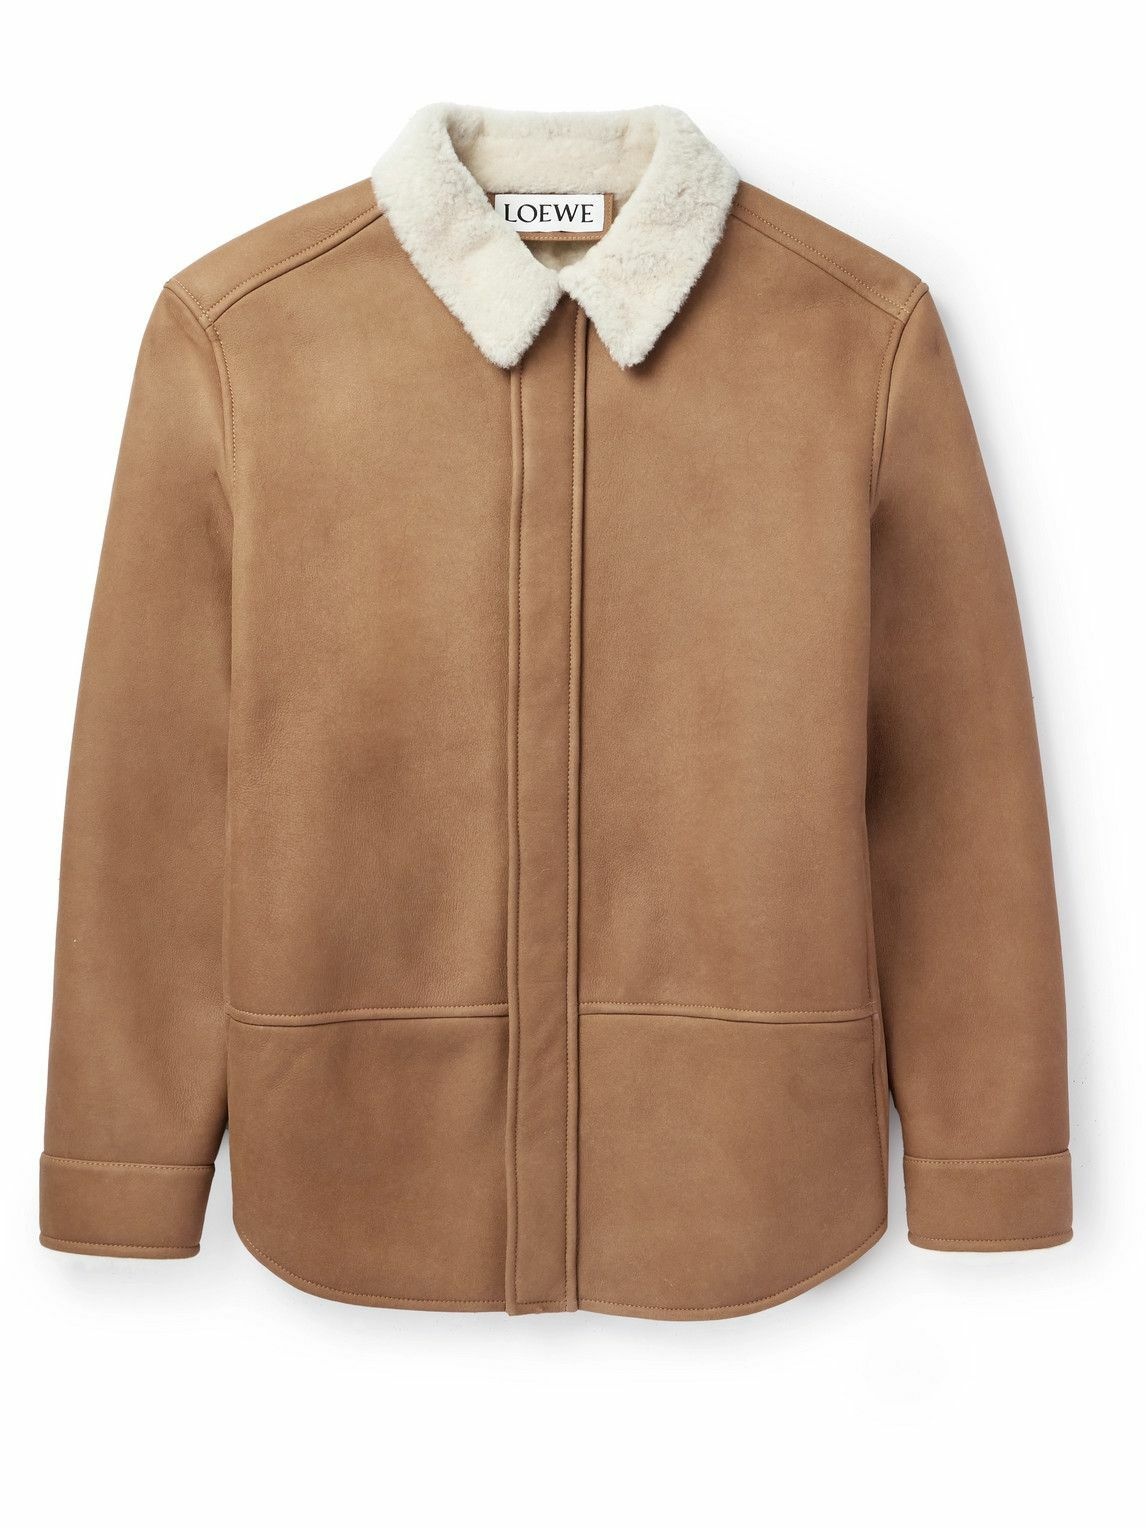 Photo: LOEWE - Shearling-Trimmed Leather Shirt Jacket - Brown